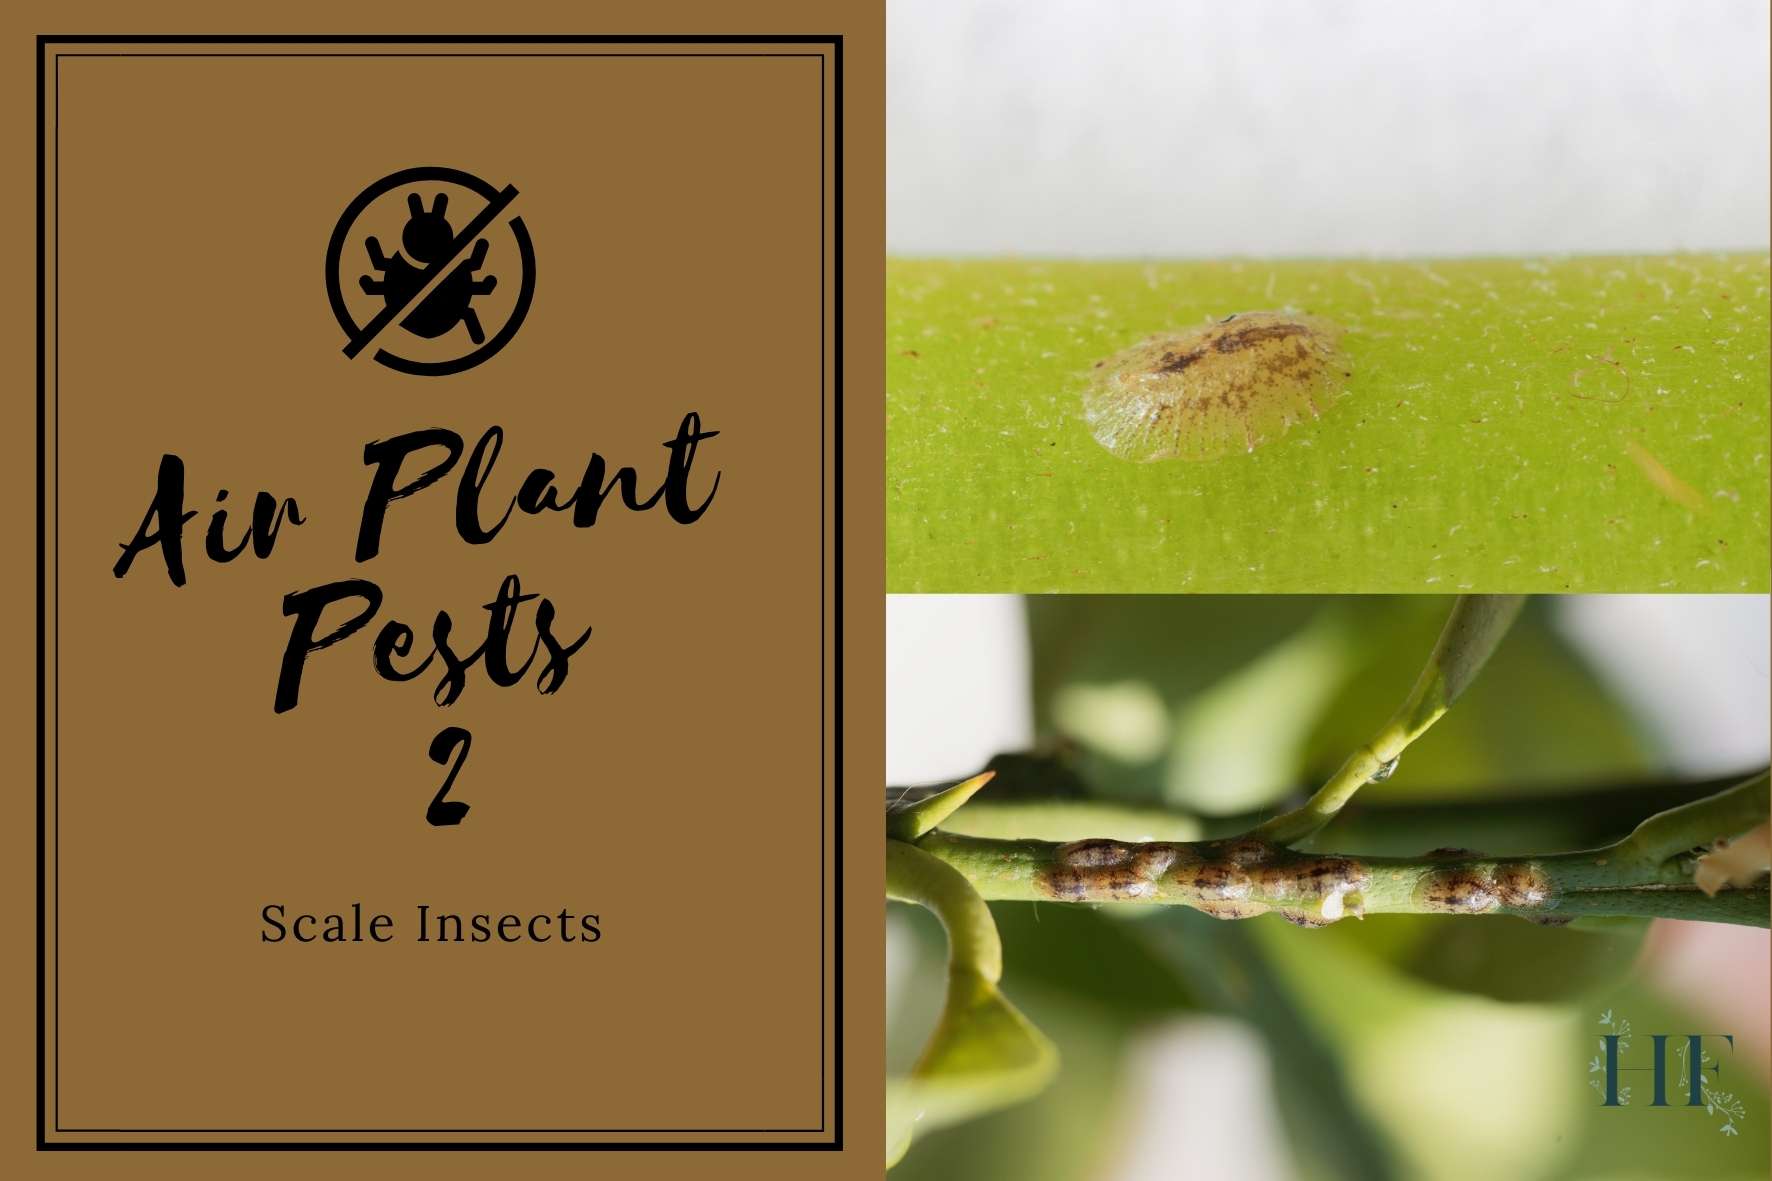 air-plant-pests-2-scale-insects